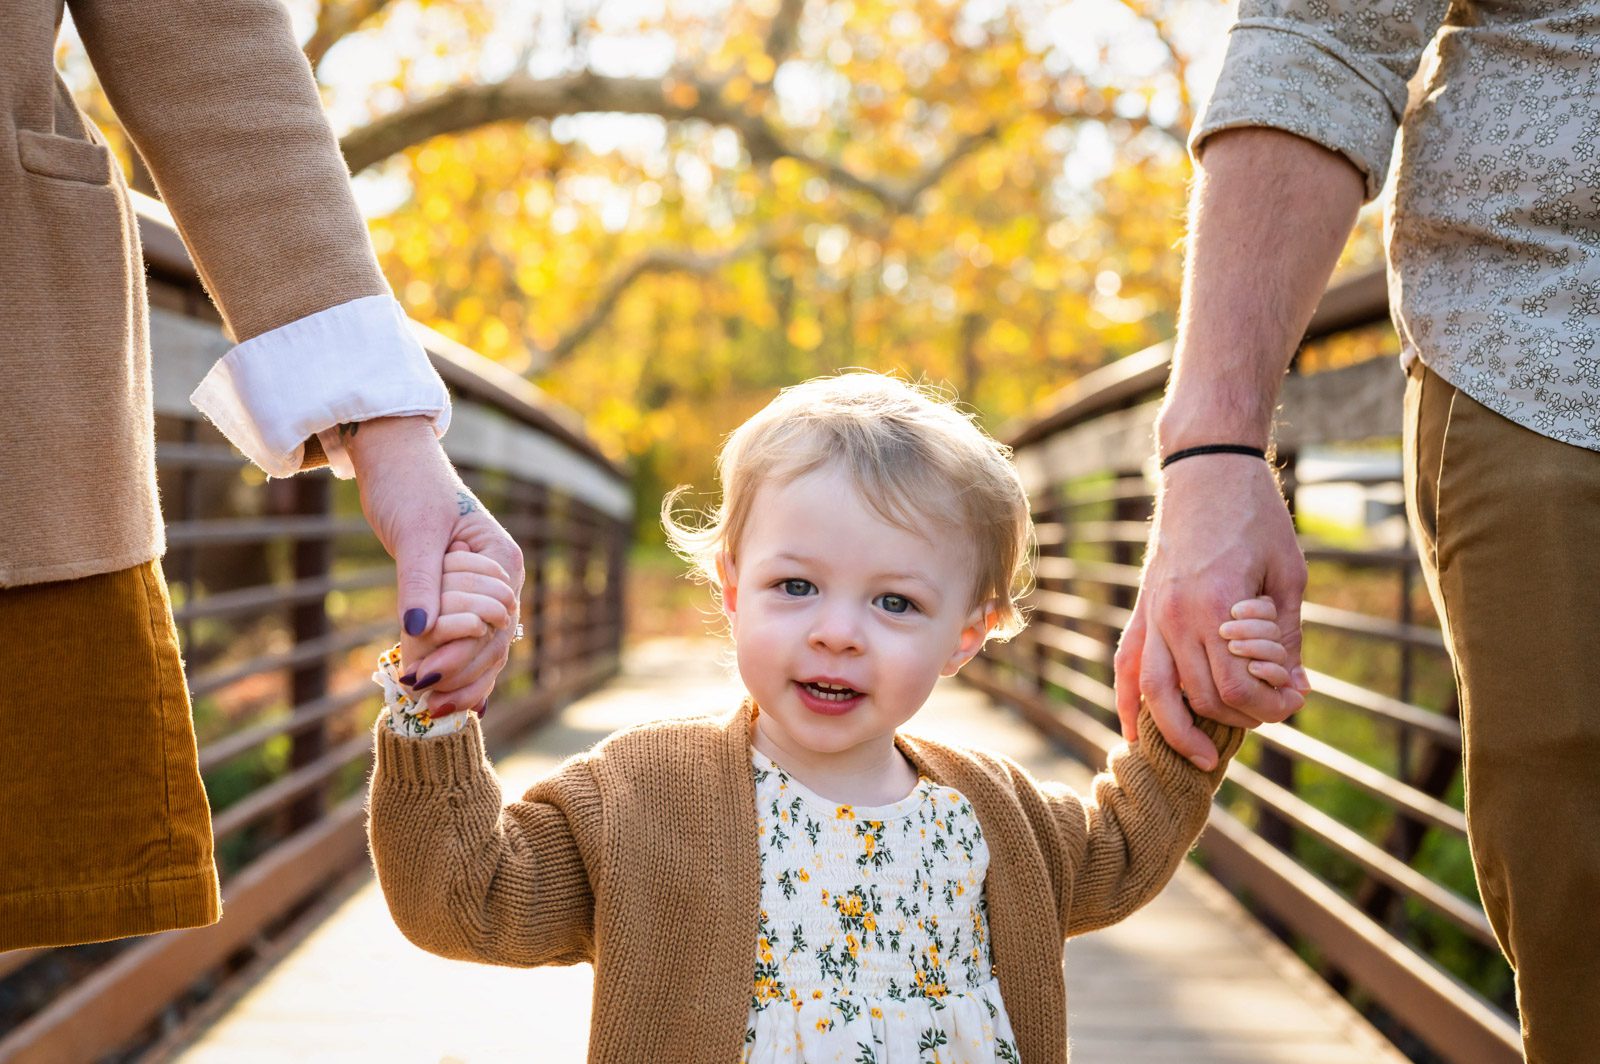 A close up image of a young girl looking at the camera and smiling as she walks across a bridge holding her parents' hands during a family photoshoot